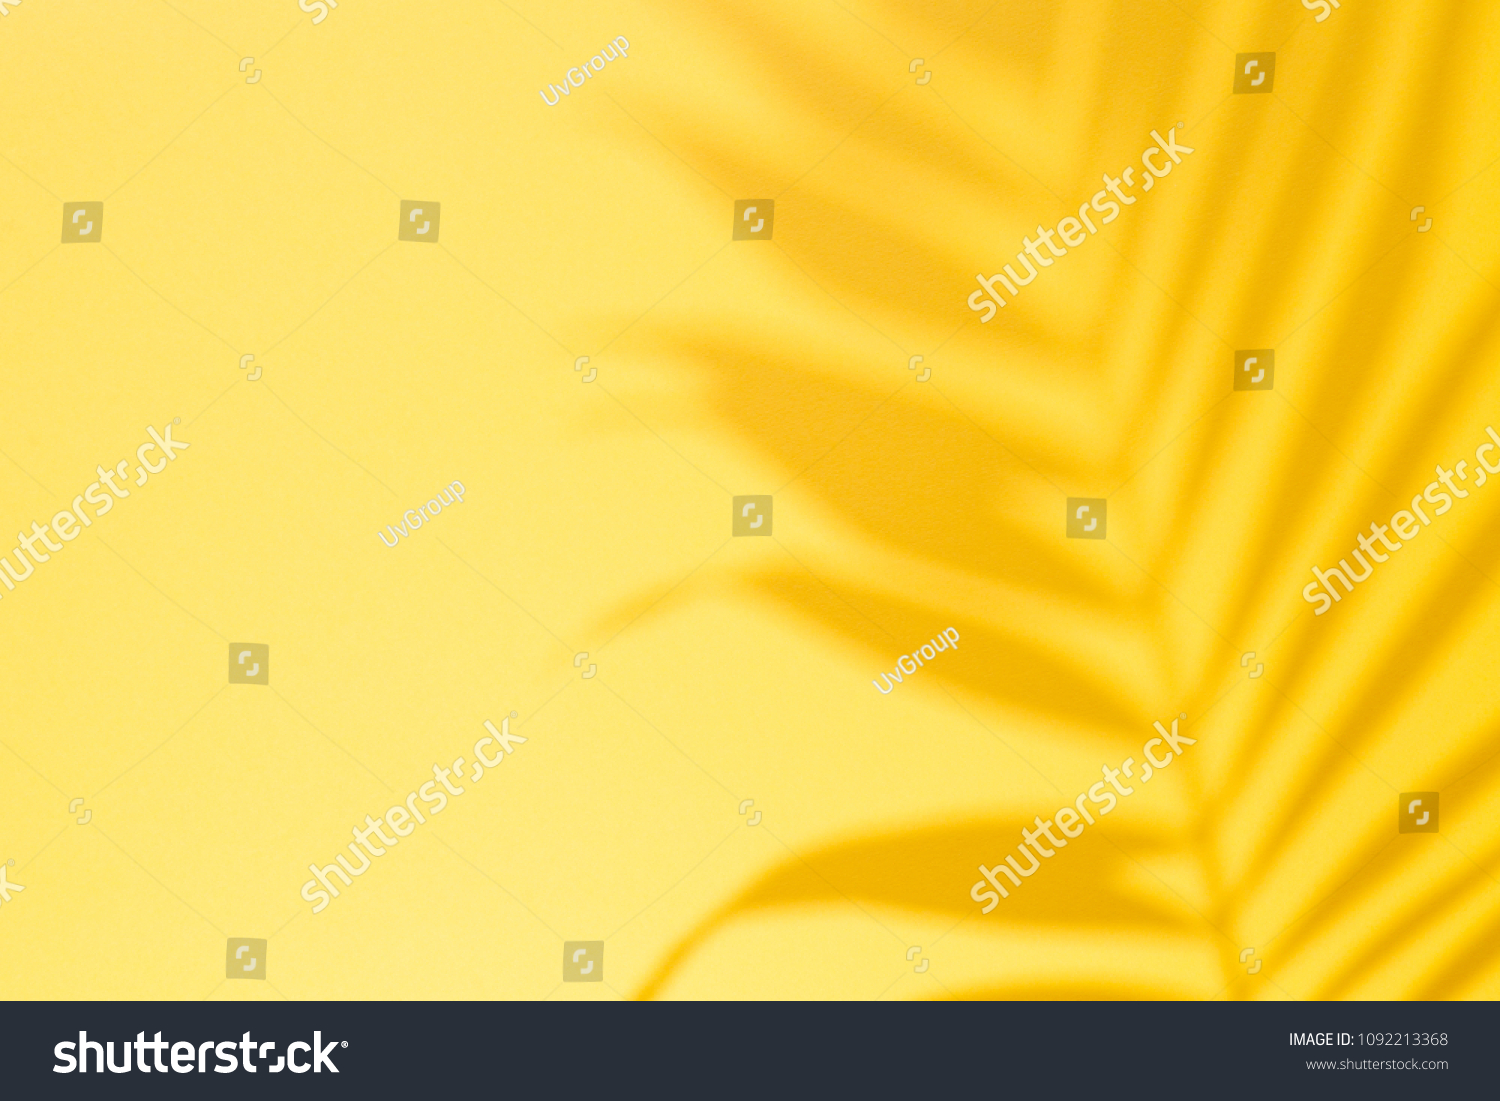 Top view of green tropical leaf Monstera shadow on yellow background. Flat lay. Summer concept with palm tree leaf, copyspace #1092213368